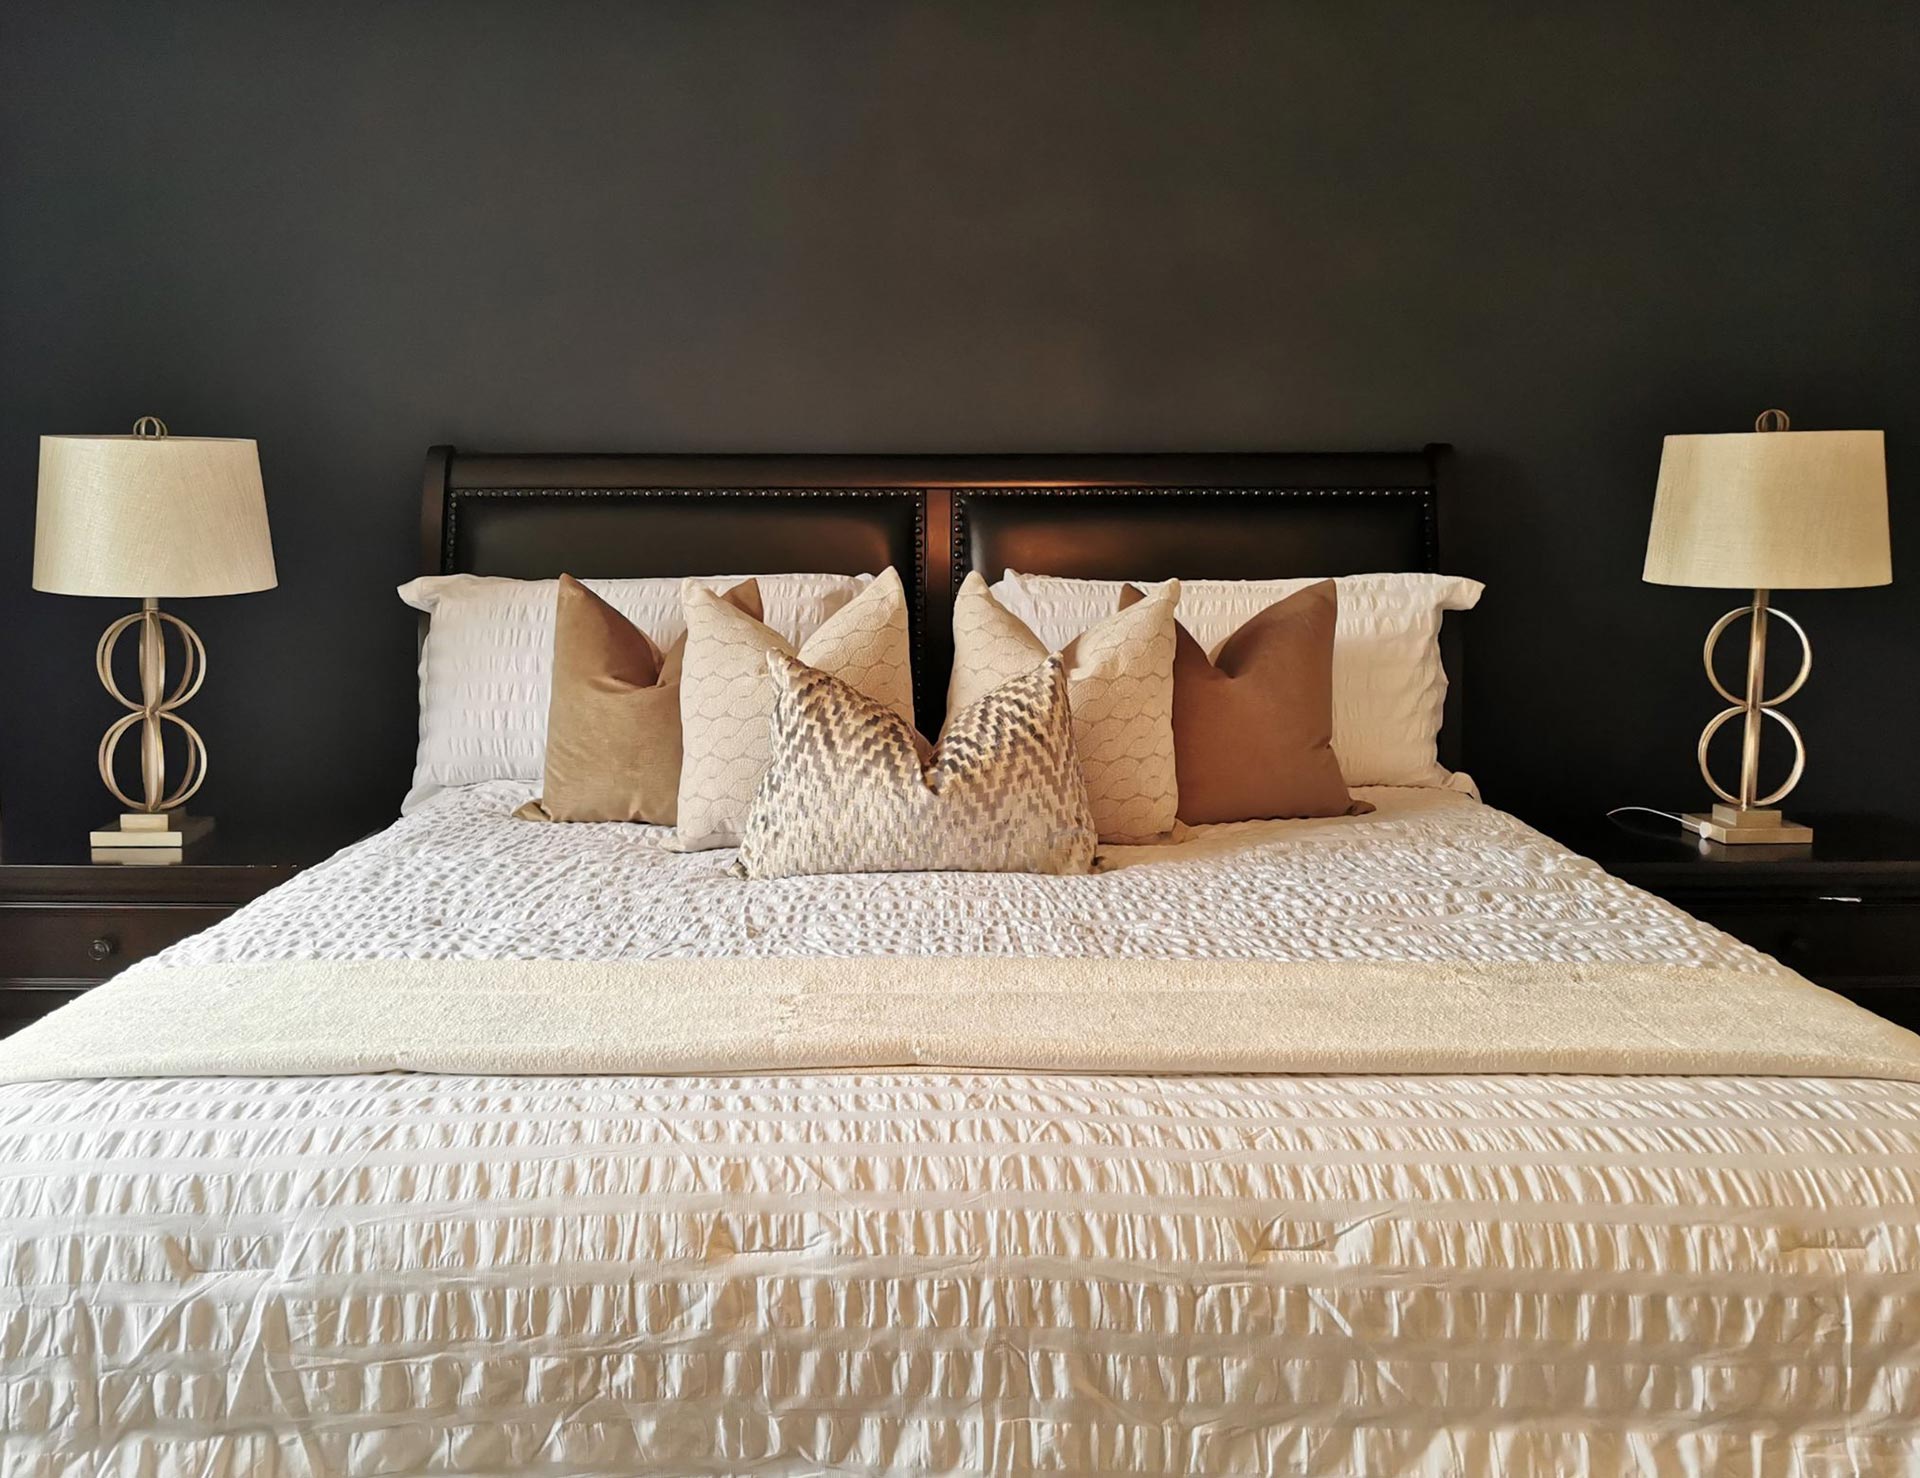 Bed set up by a home staging firm with decorative pillows and lamps